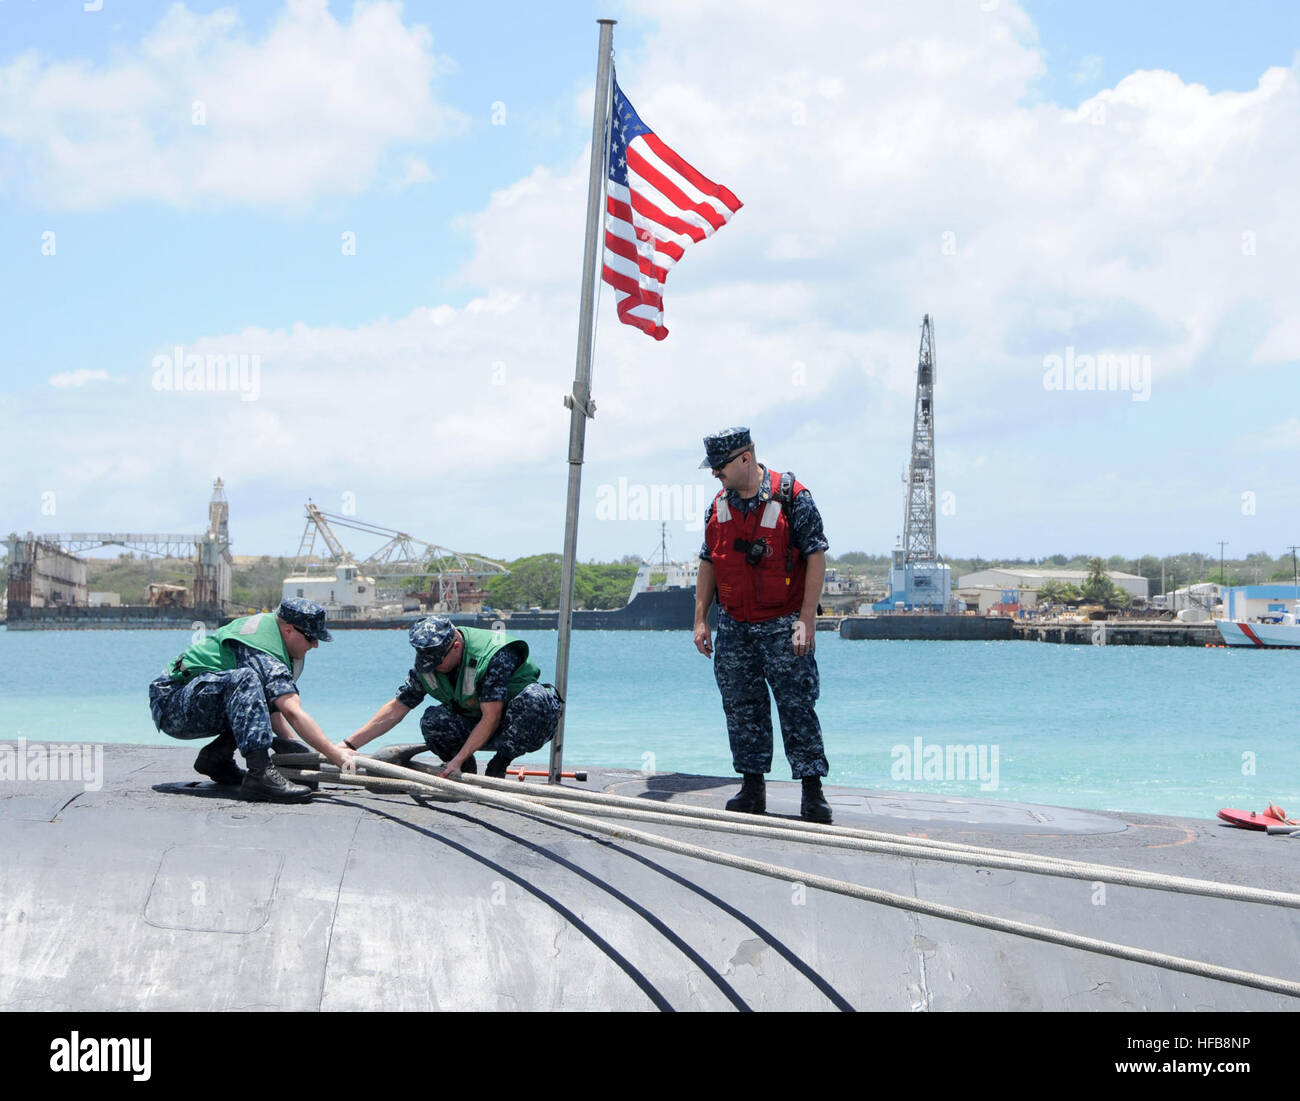 POLARIS POINT, Guam (April 11, 2013) Sailors aboard the guided-missile submarine USS Ohio (SSGN 726) secure mooring lines in Apra Harbor as Ohio arrives to conduct an exchange of command between their Gold and Blue crews. (U.S. Navy photo by Mass Communication Specialist 1st Class Jeffrey Jay Price/Released) 130411-N-LS794-012 Join the conversation http://www.facebook.com/USNavy http://www.twitter.com/USNavy http://navylive.dodlive.mil 130411-N-LS794-012 (8641409918) Stock Photo